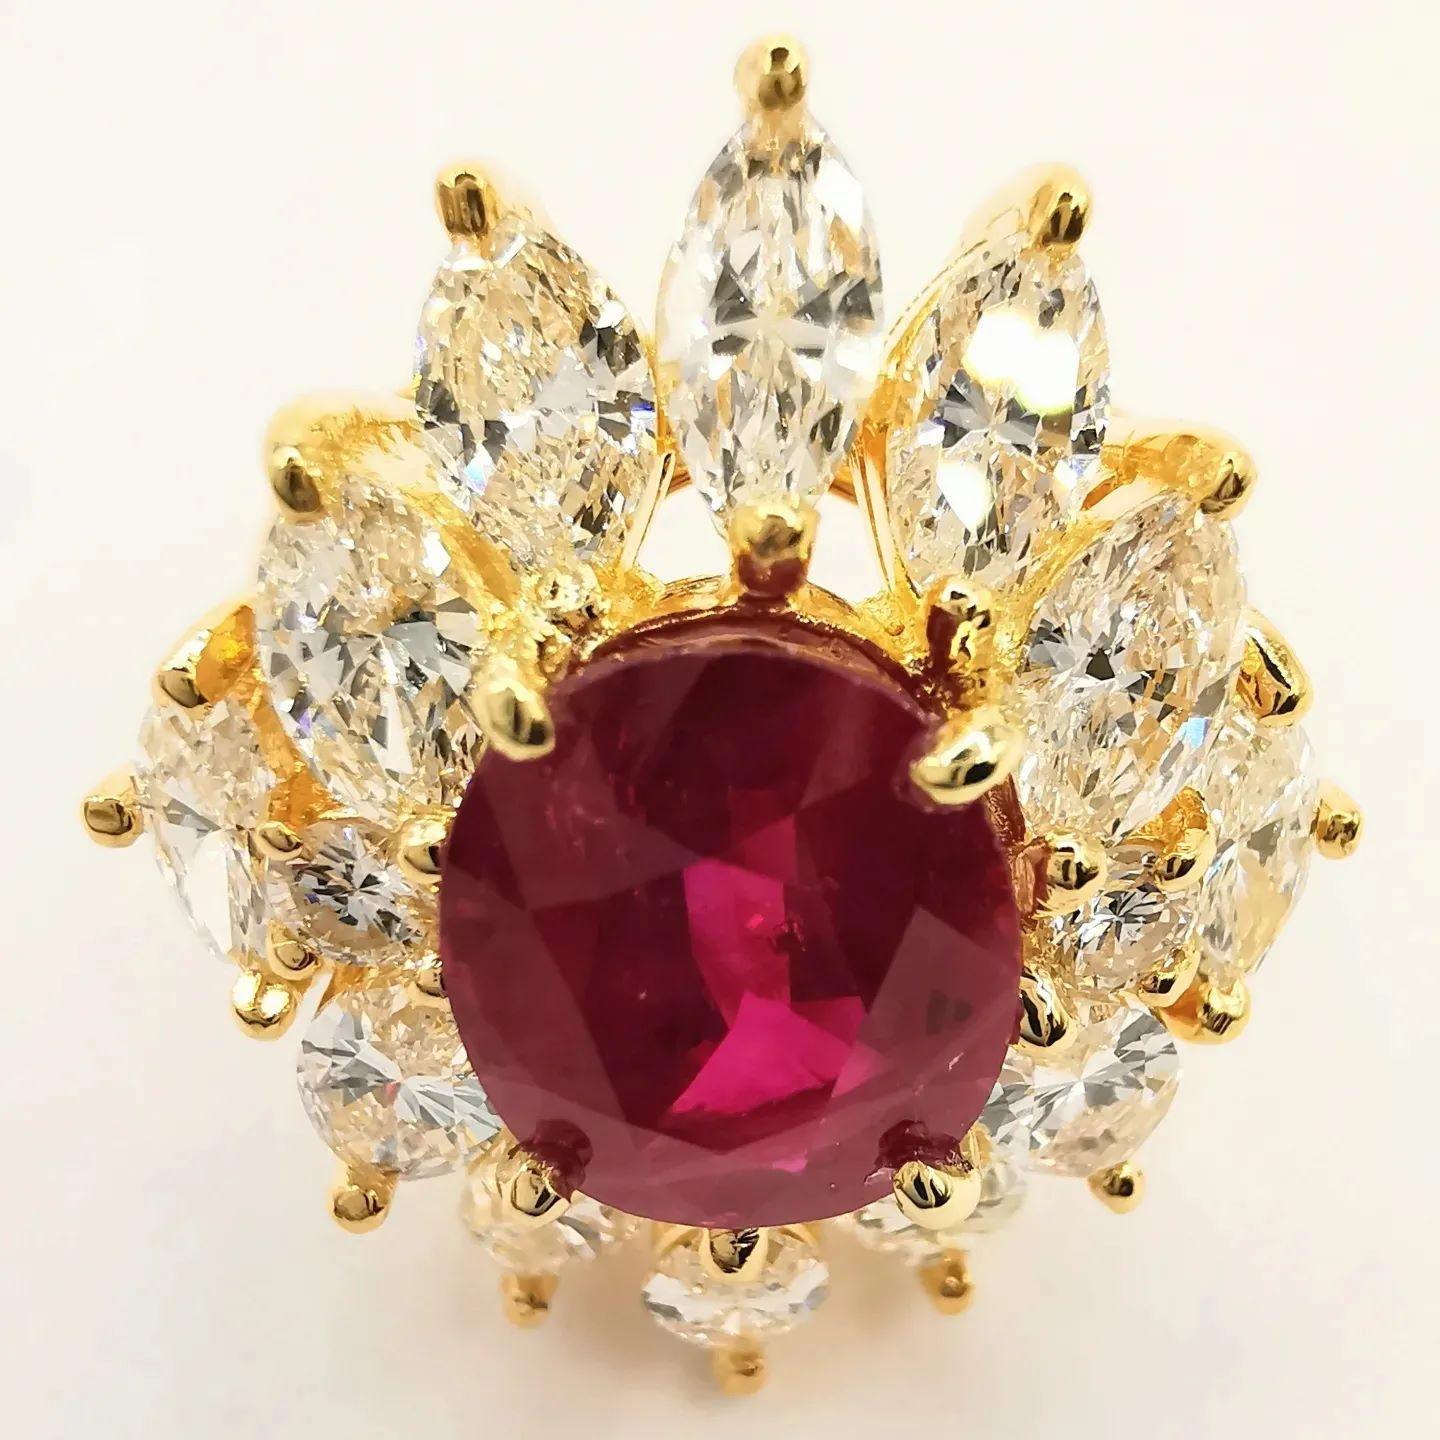 Introducing our stunning GRS Certified 3.11 Carat Natural Oval Ruby Marquise Diamond Ring, crafted in 850 yellow gold. This ring features a natural oval cut red ruby from Siam (Thailand) with a weight of 3.11ct, the red color of the ruby adds a